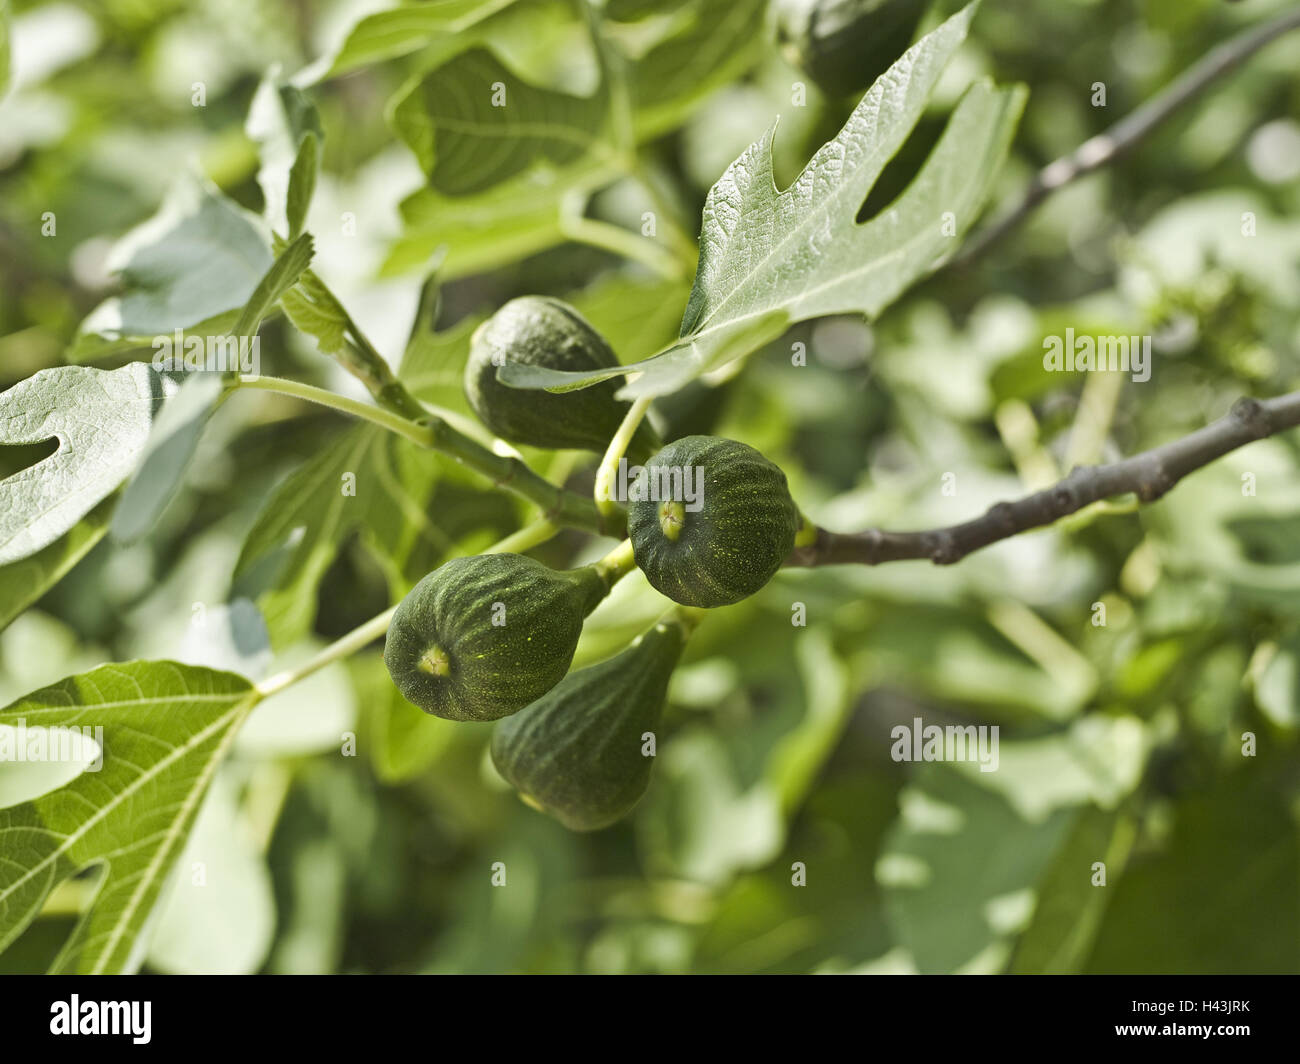 Figuier, Ficus carica, fruits, feuilles, medium close-up, Maulbeergewächse, figues, ficus, fruits, immature, vert, Close up, Banque D'Images